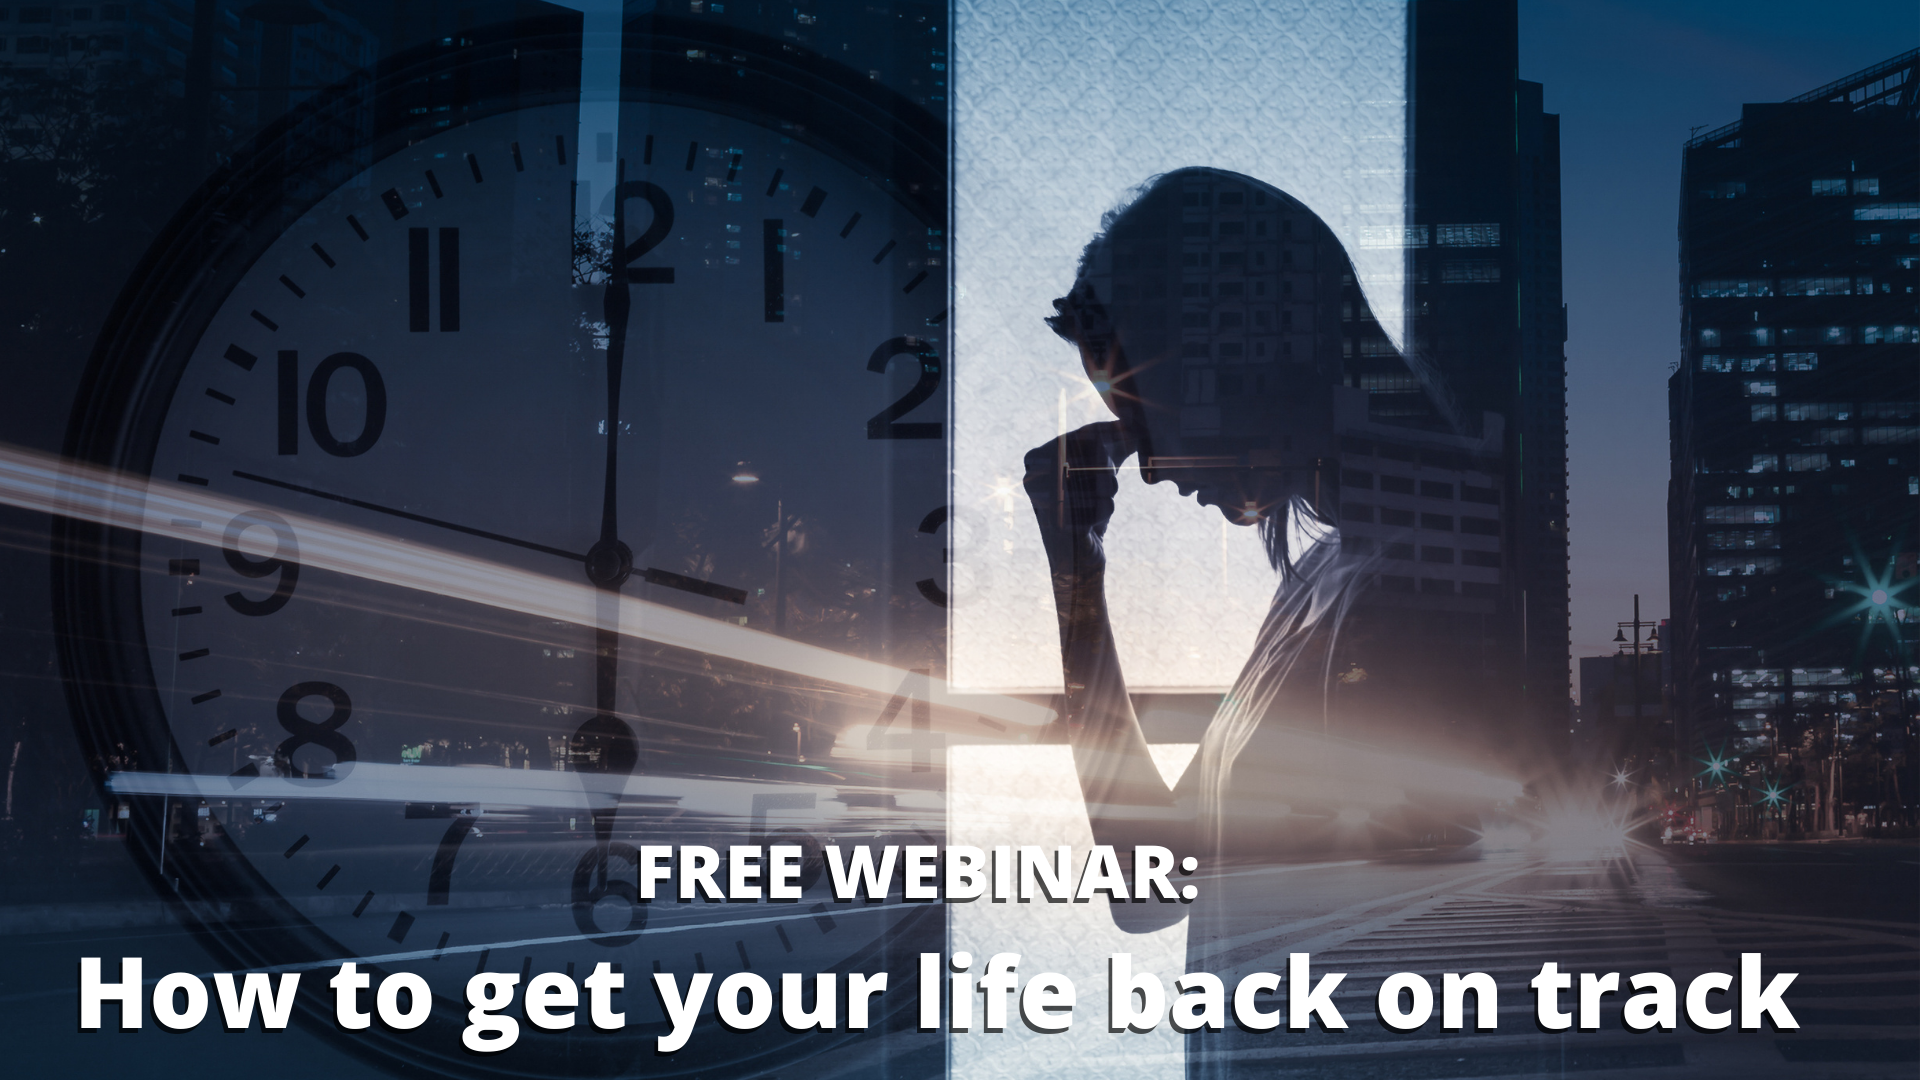 How to get your life back on track